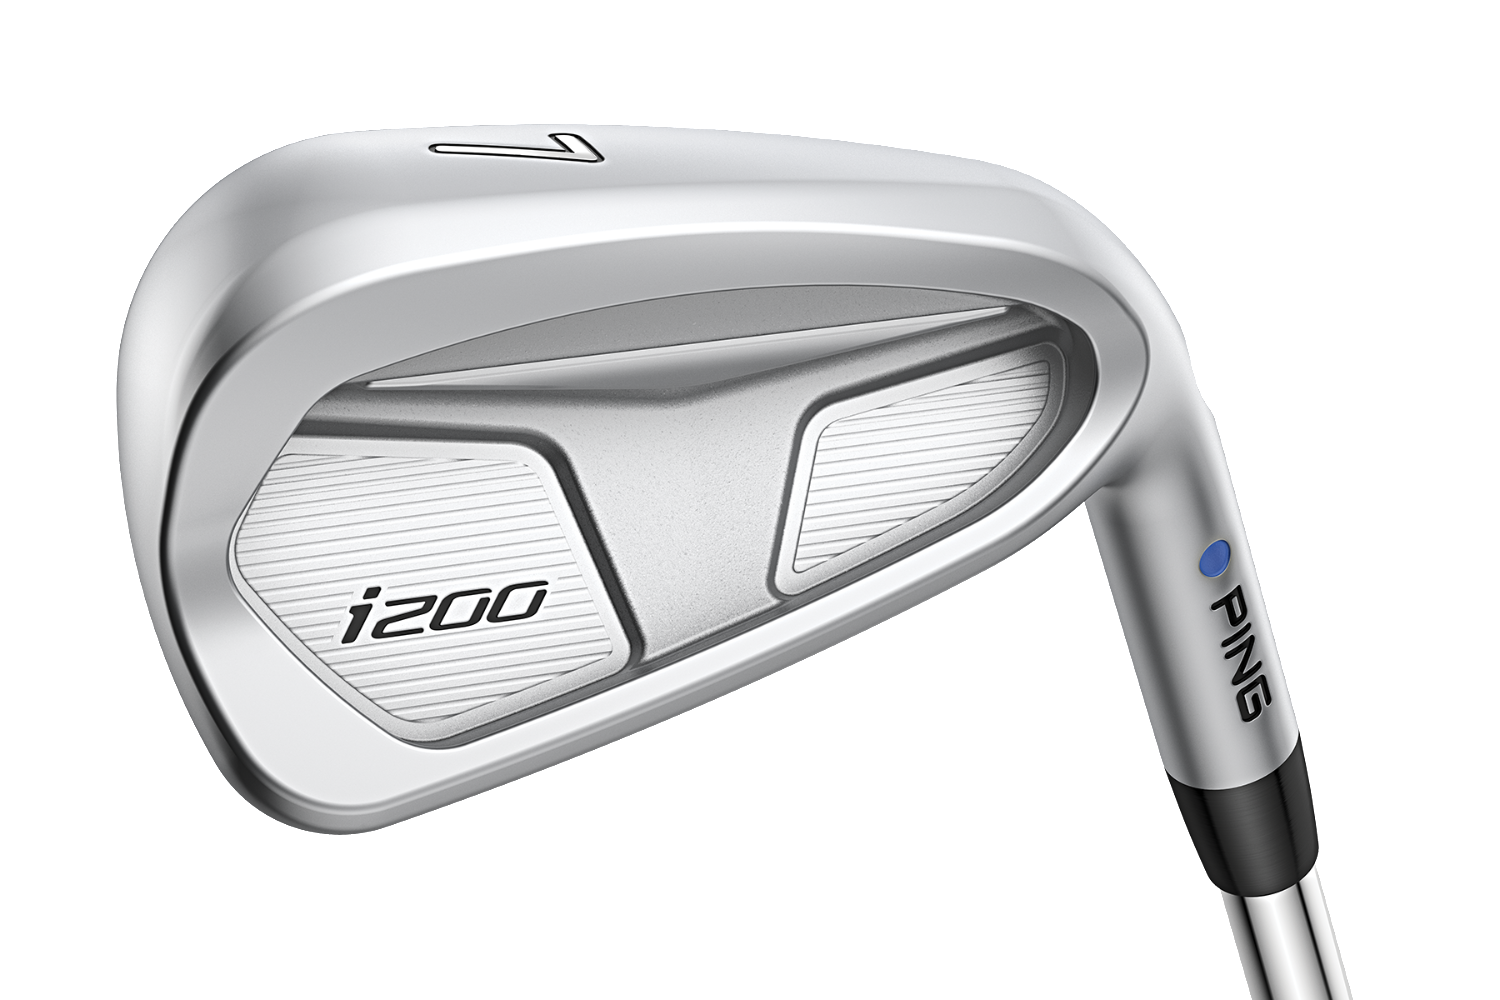 Ping Golf launch their new i200 Iron